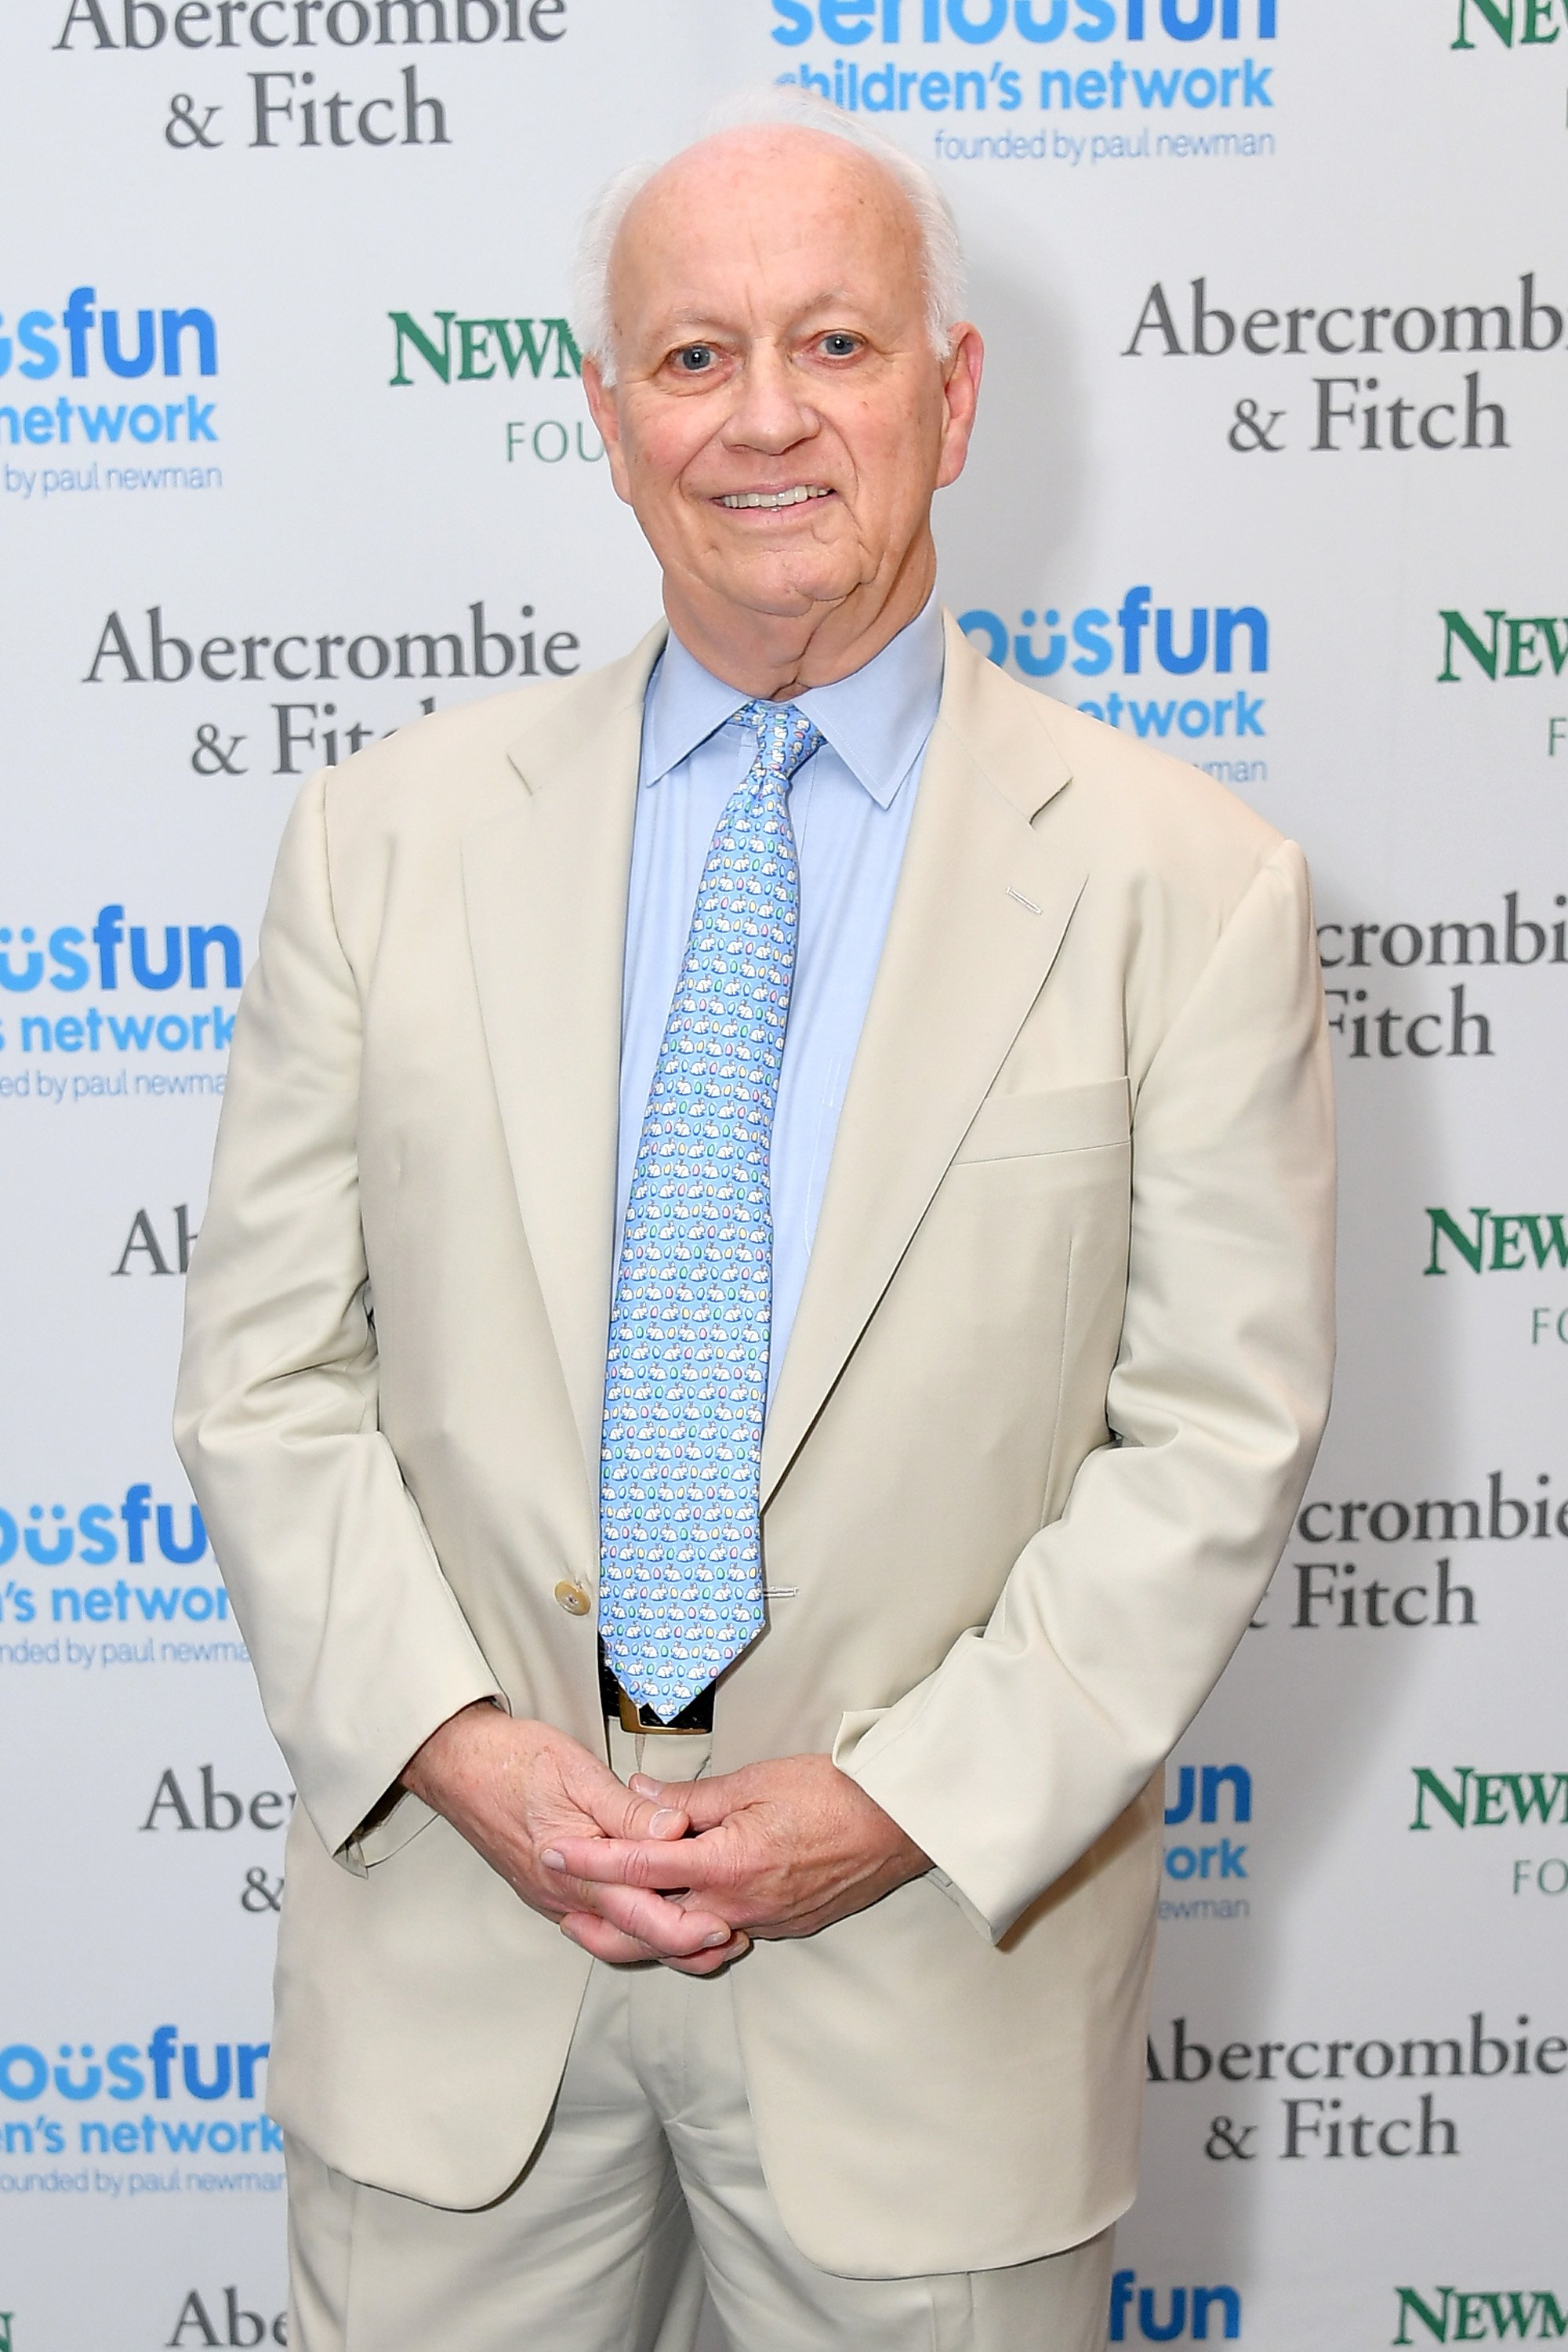 Bob Forrester during the 2018 SeriousFun Children's Network Gala at The Ziegfeld Ballroom on May 21, 2018 in New York City. | Source: Getty Images